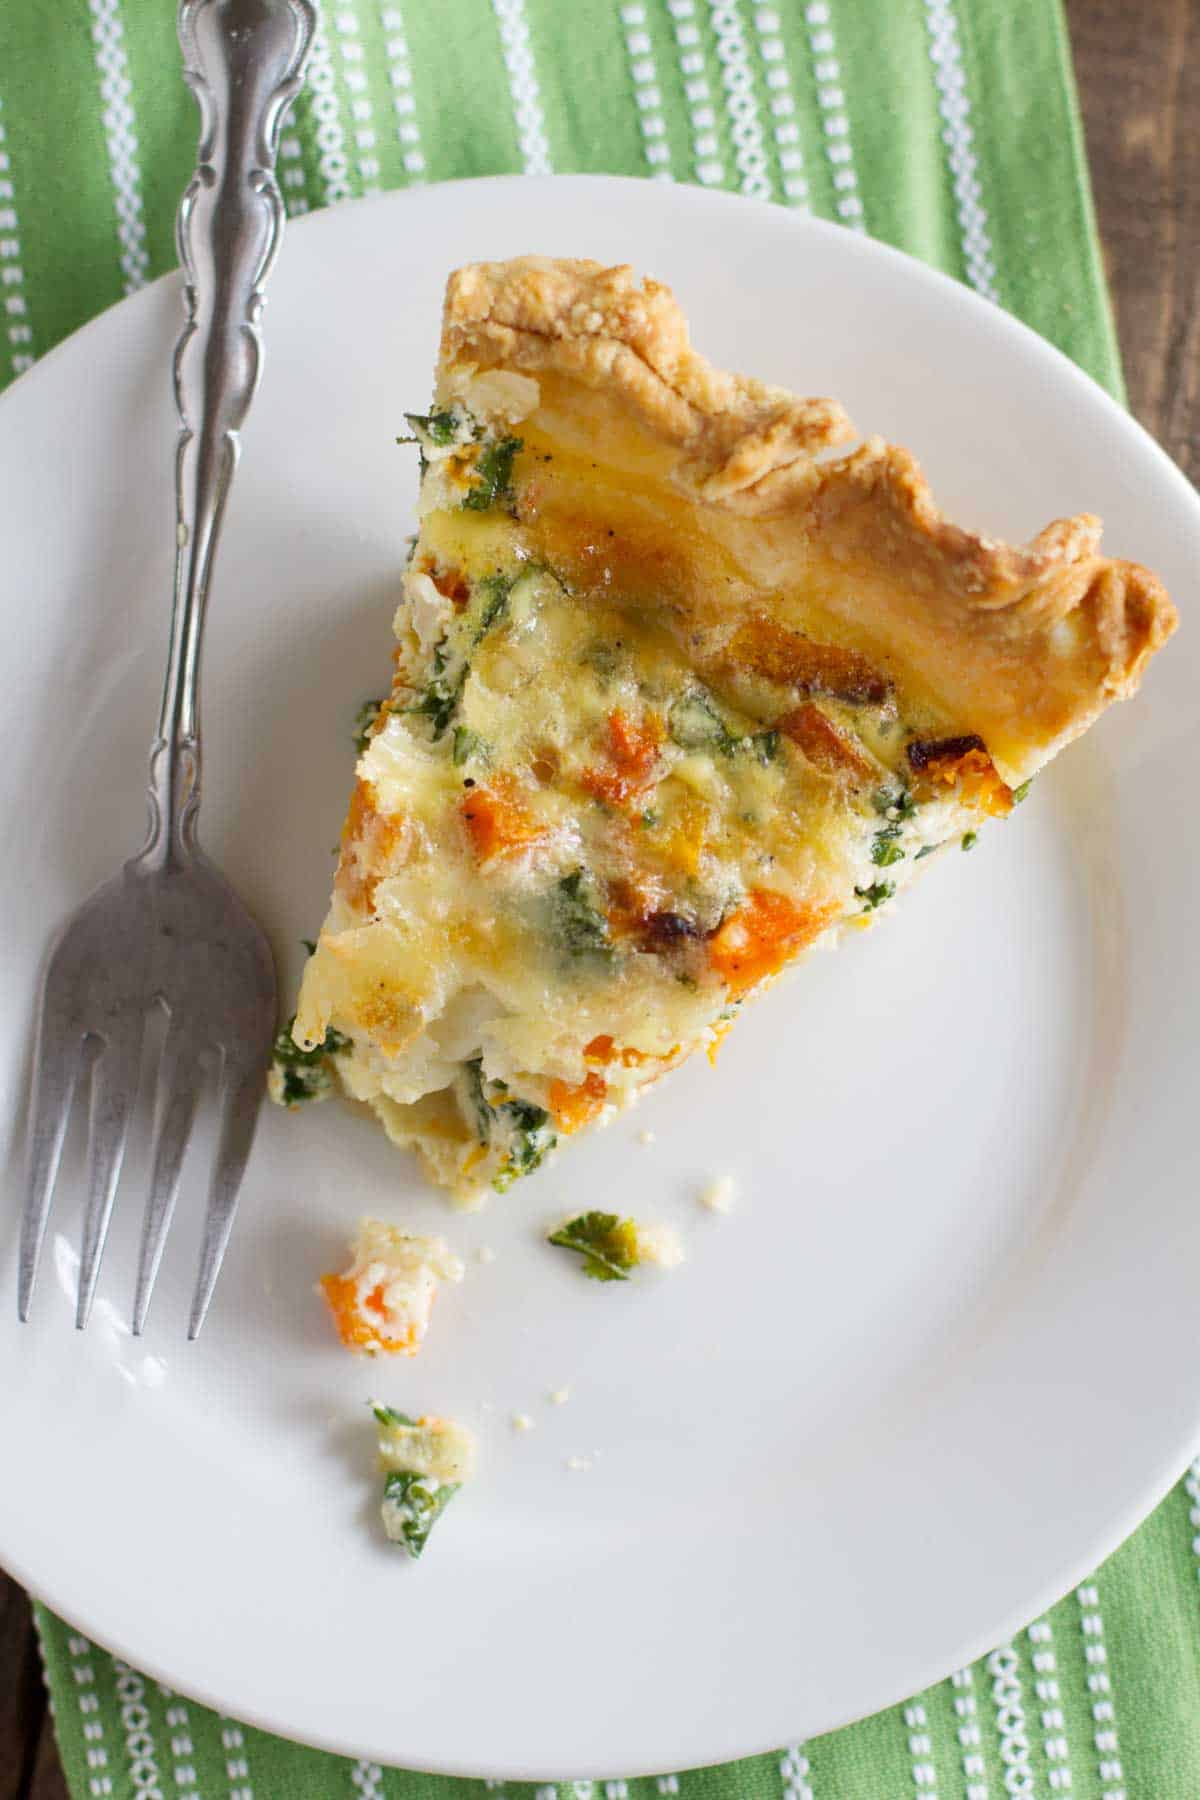 Slice of butternut squash quiche with kale on a plate with a bite taken from it.